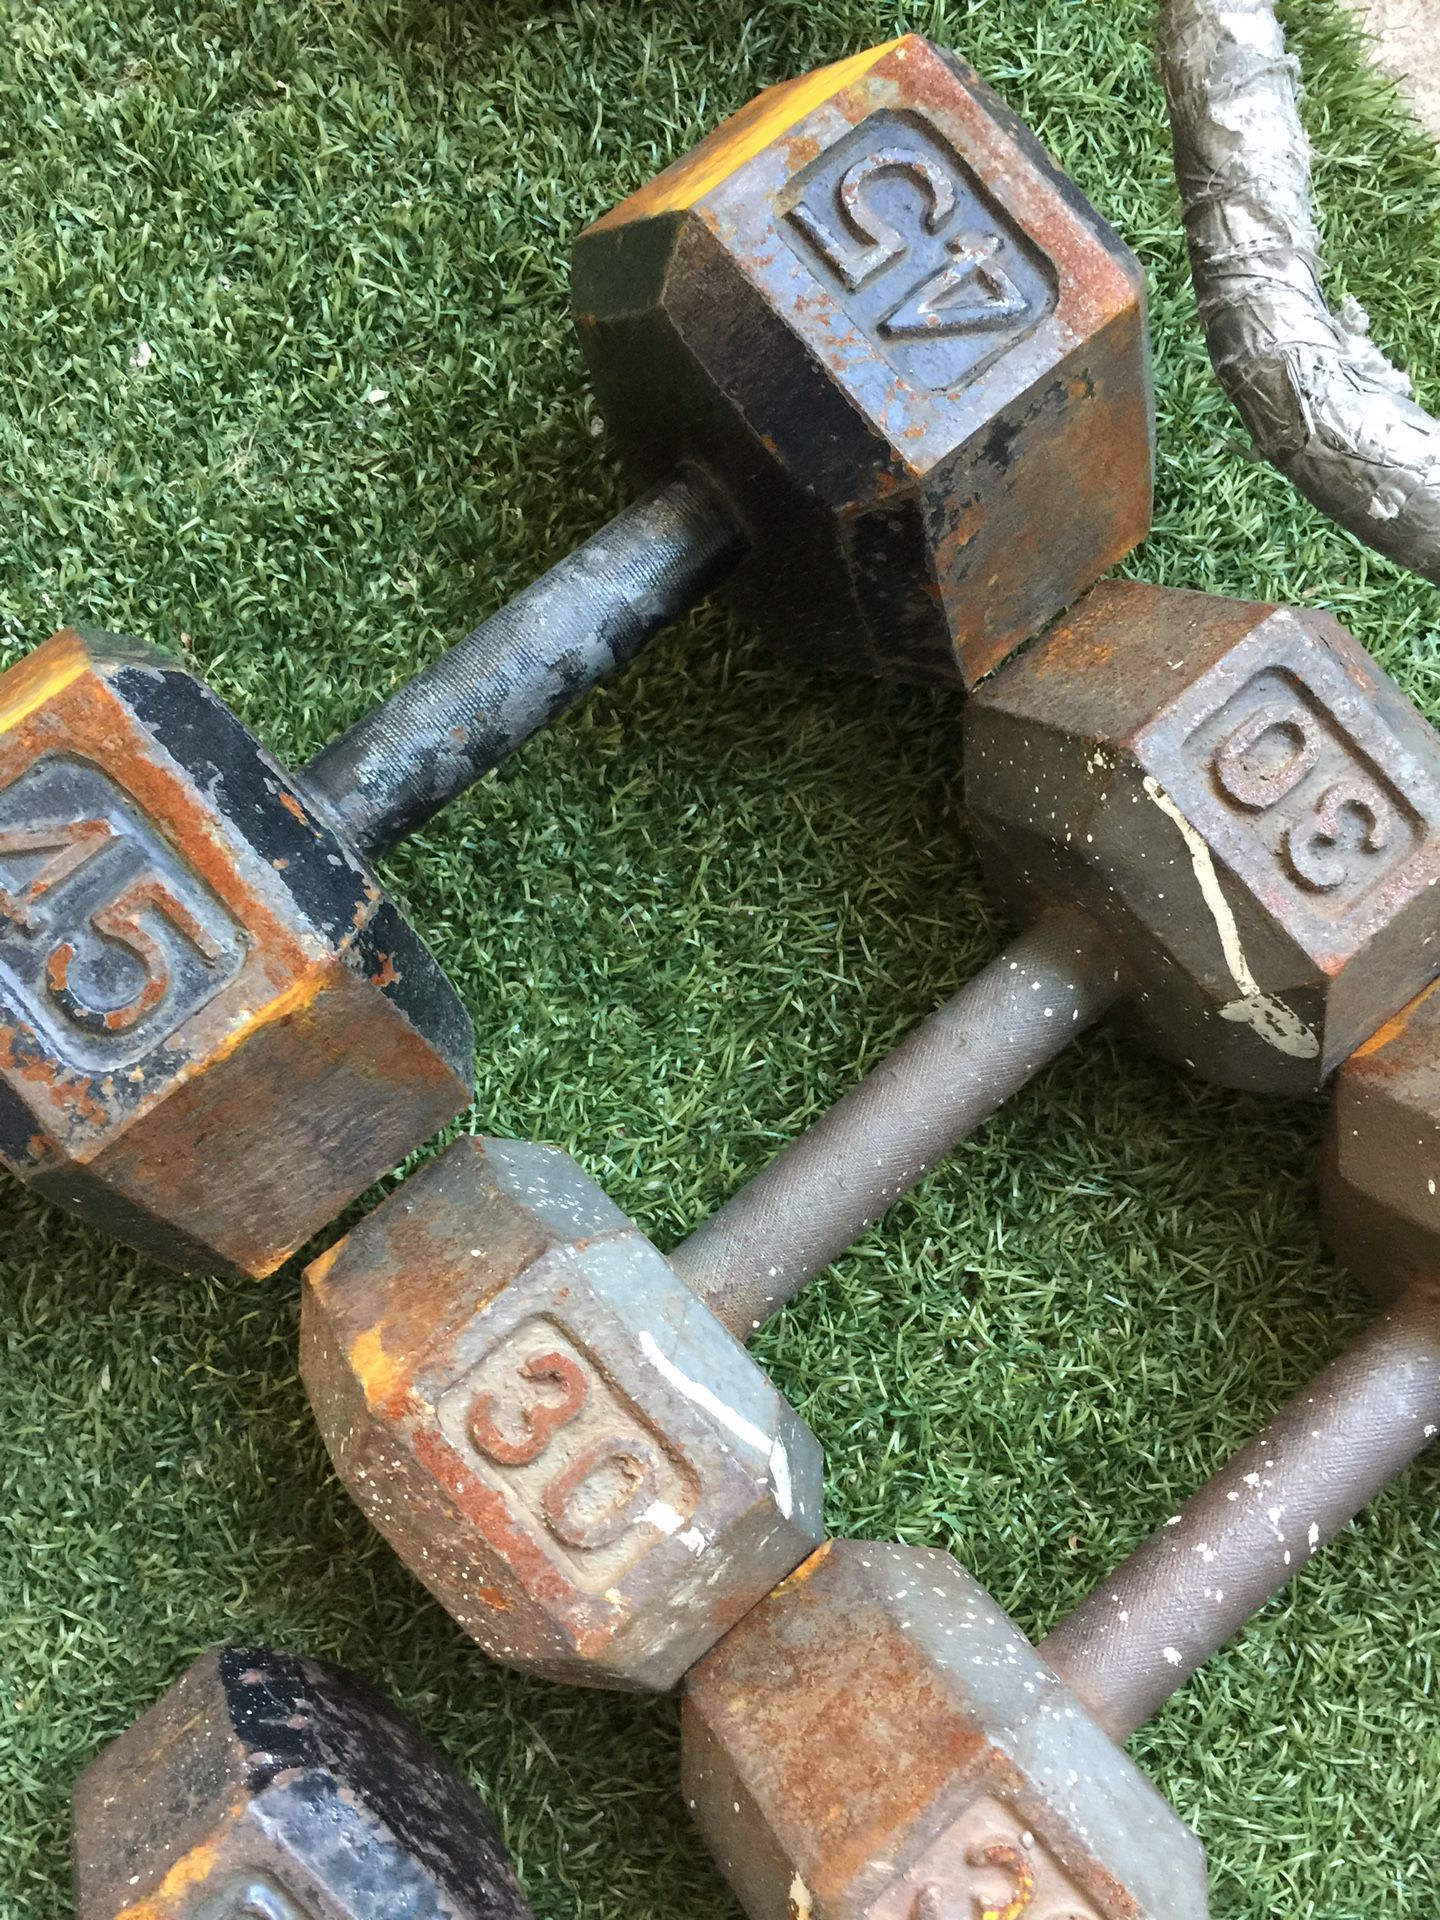 Dumbbell weight and a Barbell Dumbbell